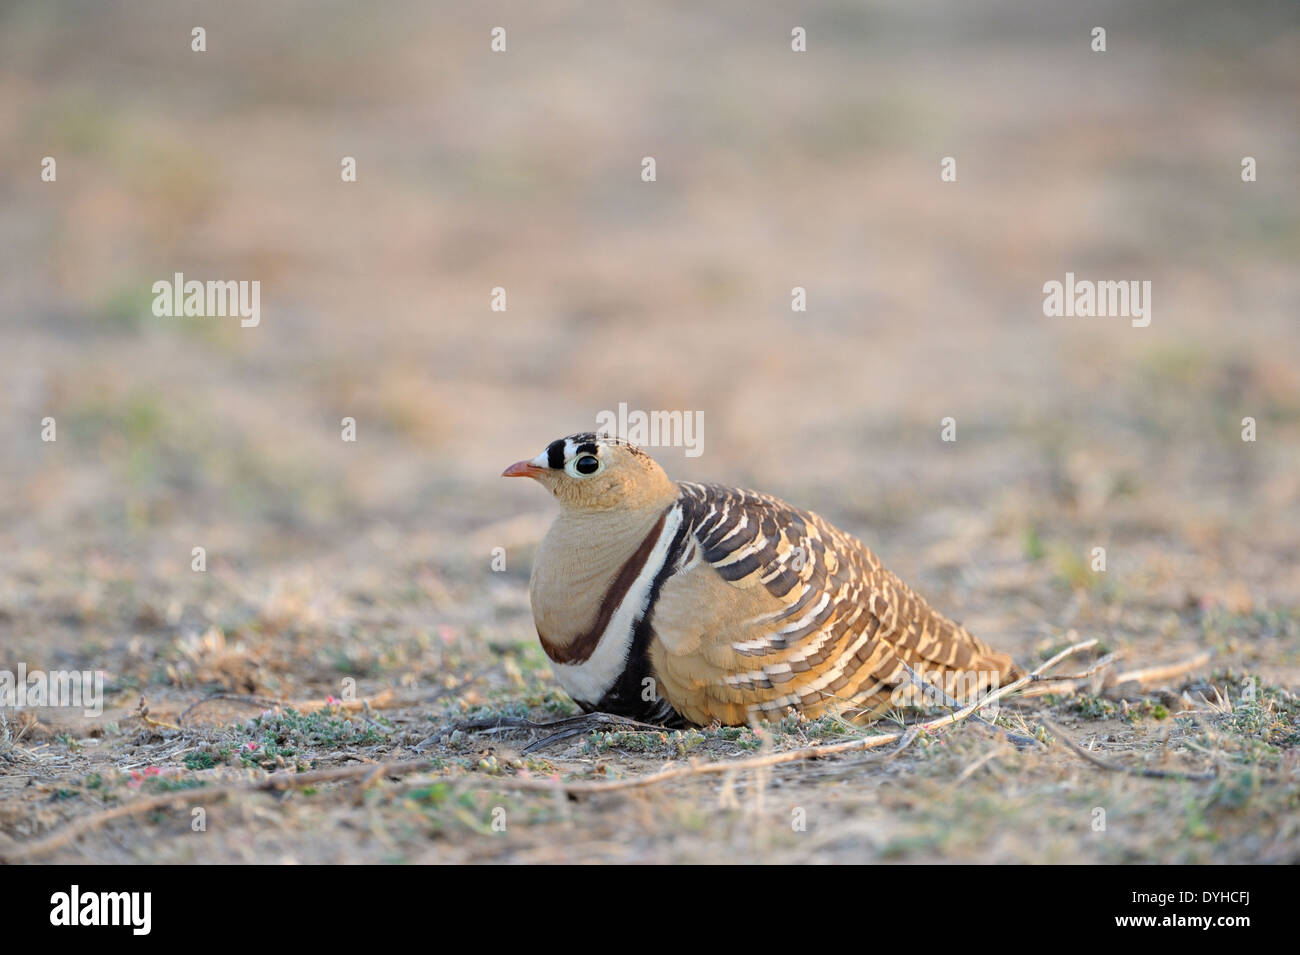 Painted sandgrouse (Pteclores indicus) lying on ground. Stock Photo